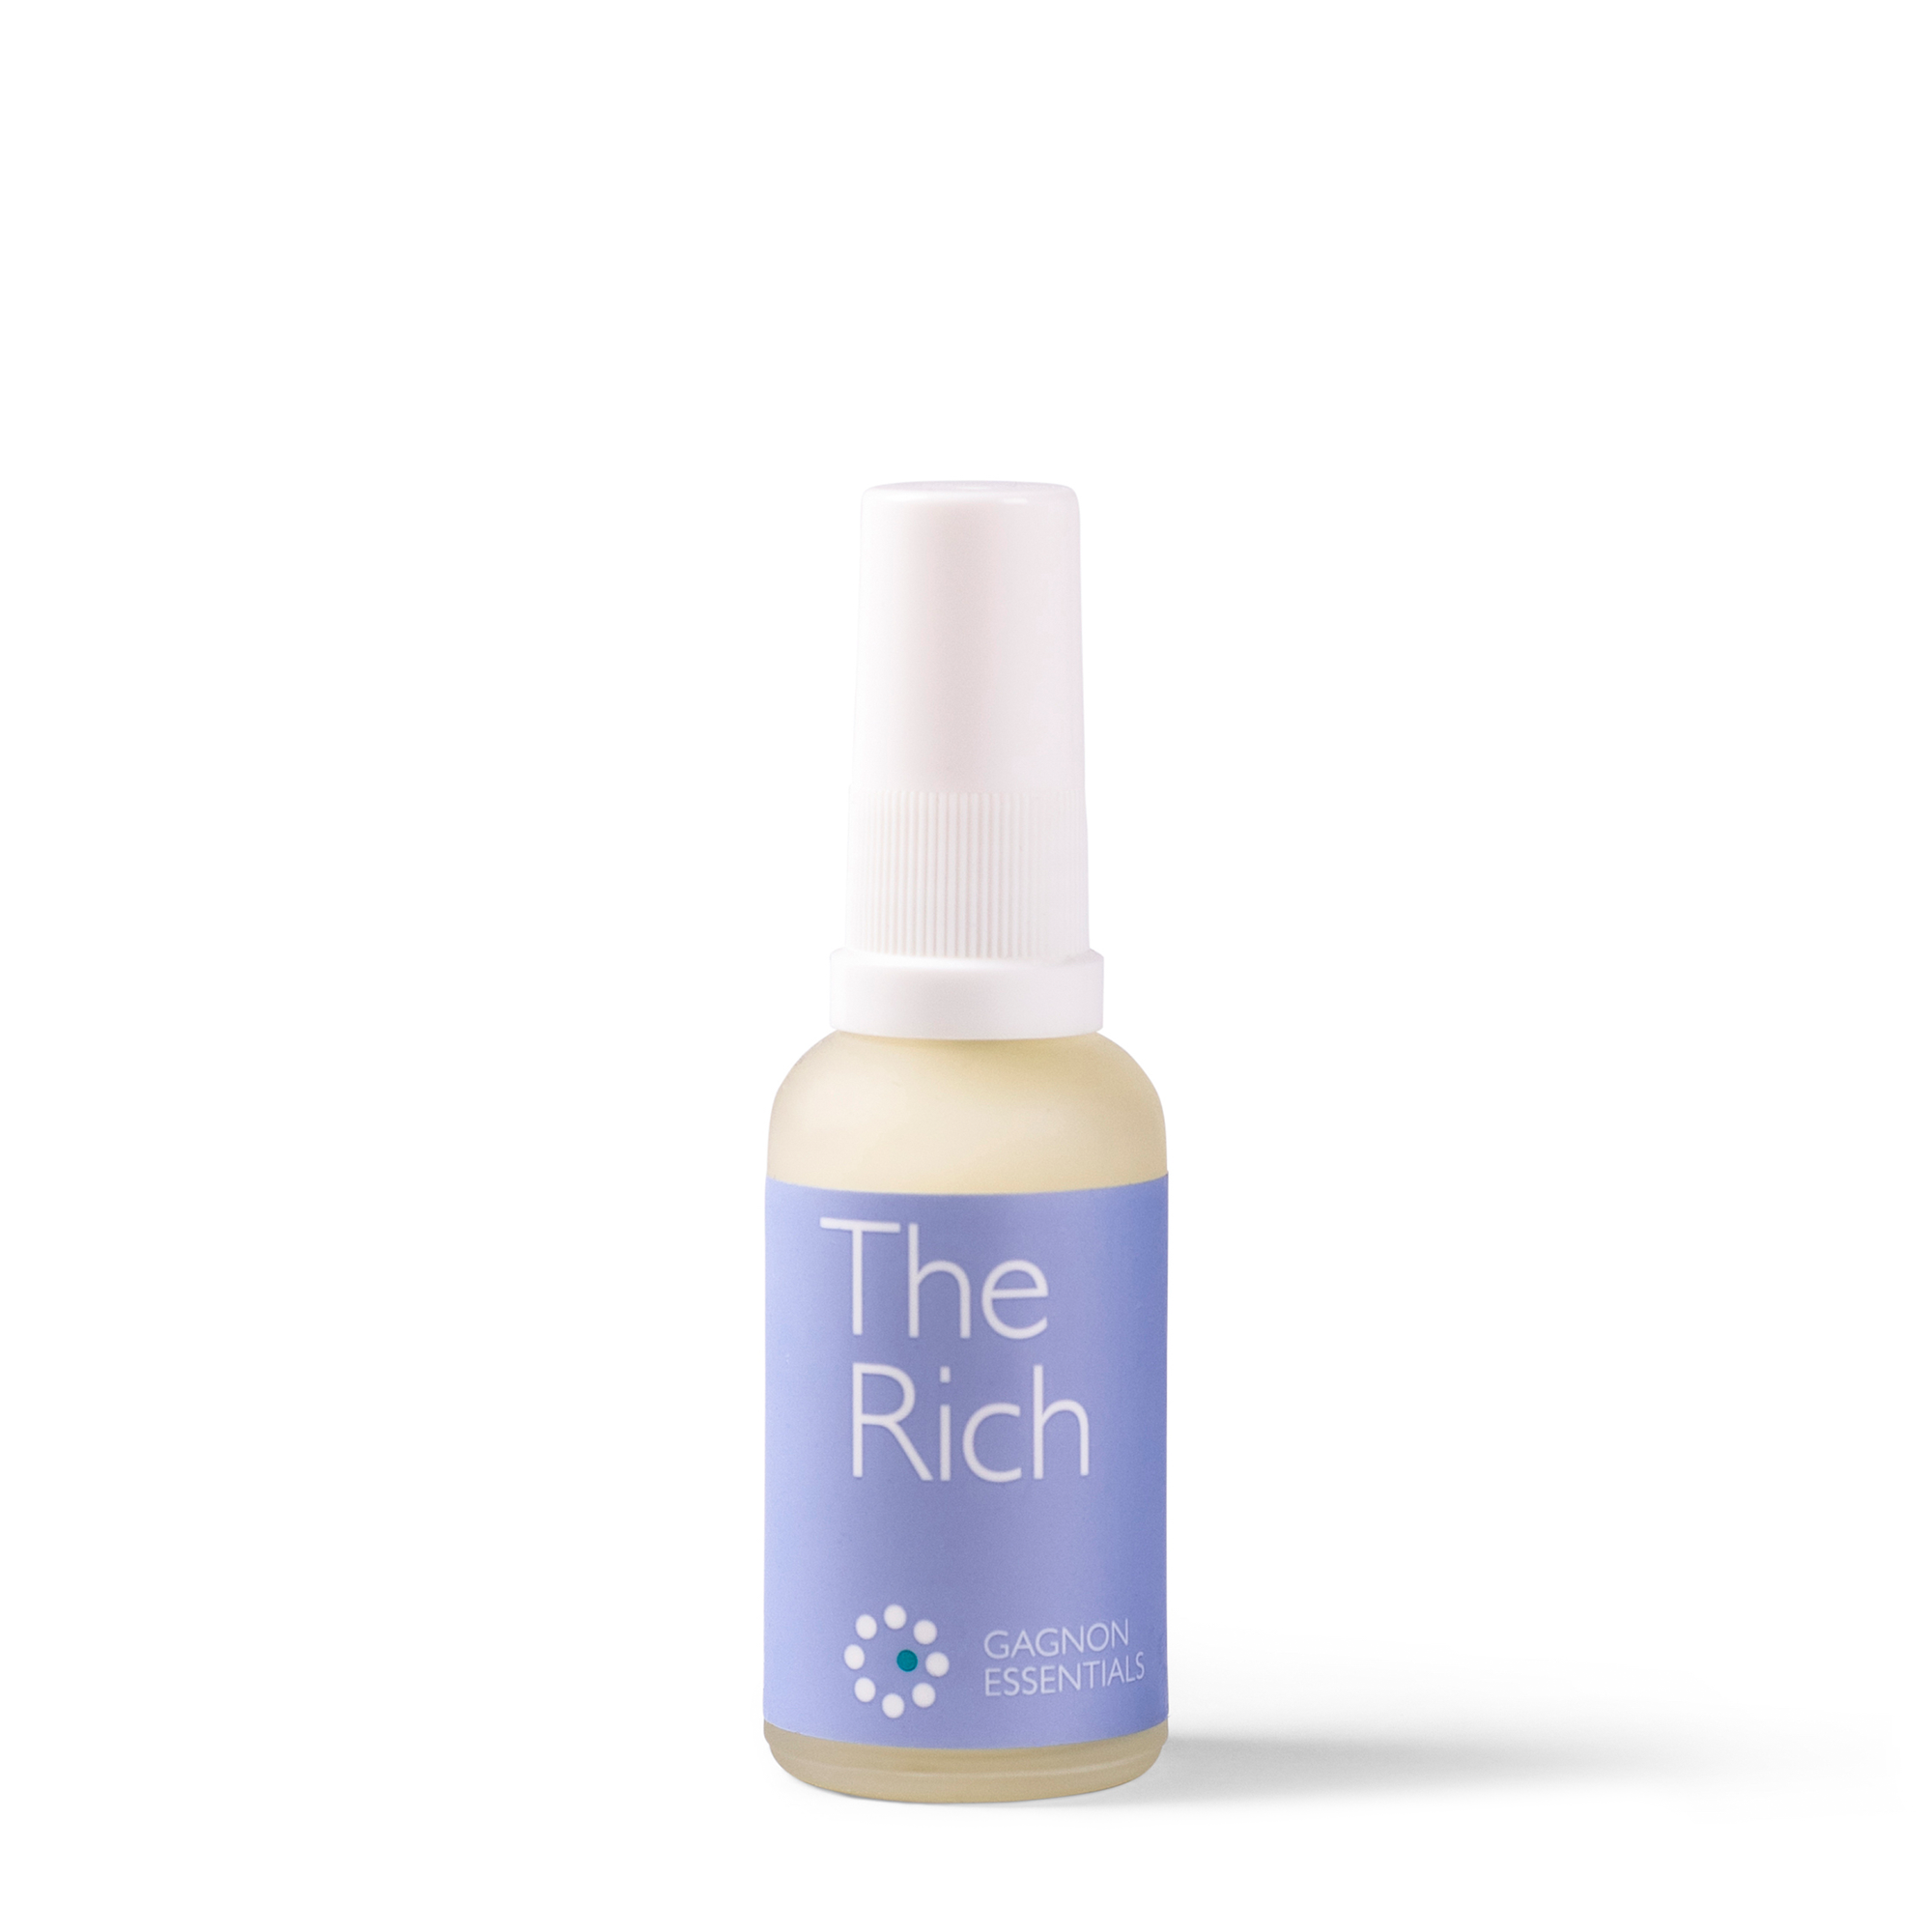 The Rich emu oil is ideal for dry, irritated skin and creates a protective layer to calm irritation. It is effective for treating skin conditions like eczema, psoriasis, and acne rosacea. Packed in 30ml bottle.